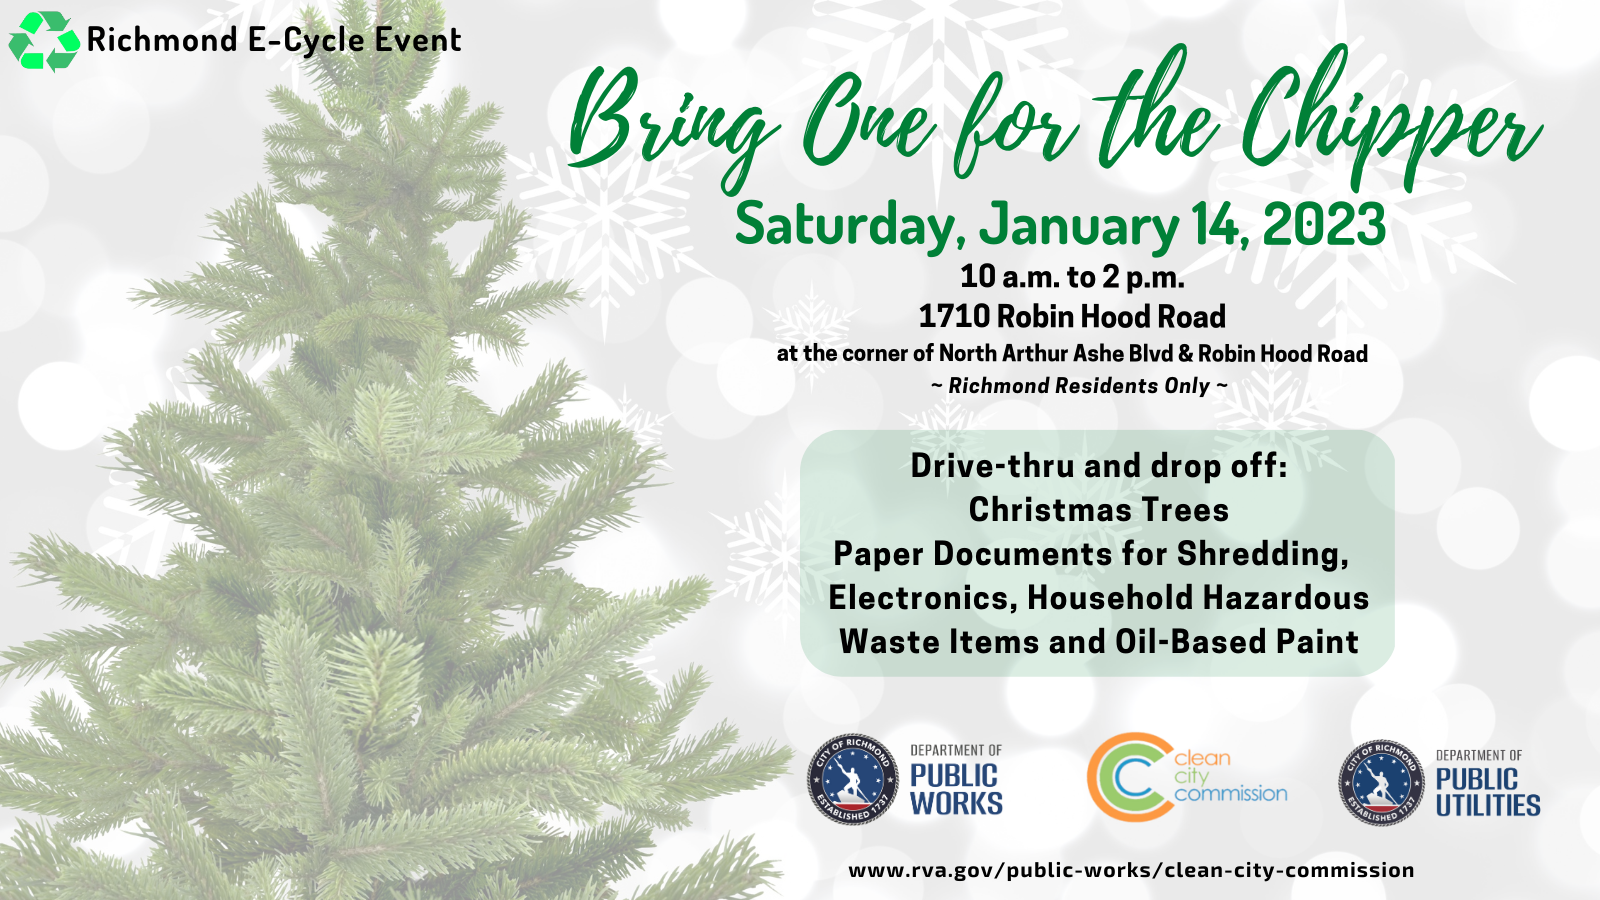 Image - Bring One for the Chipper Recycling Event